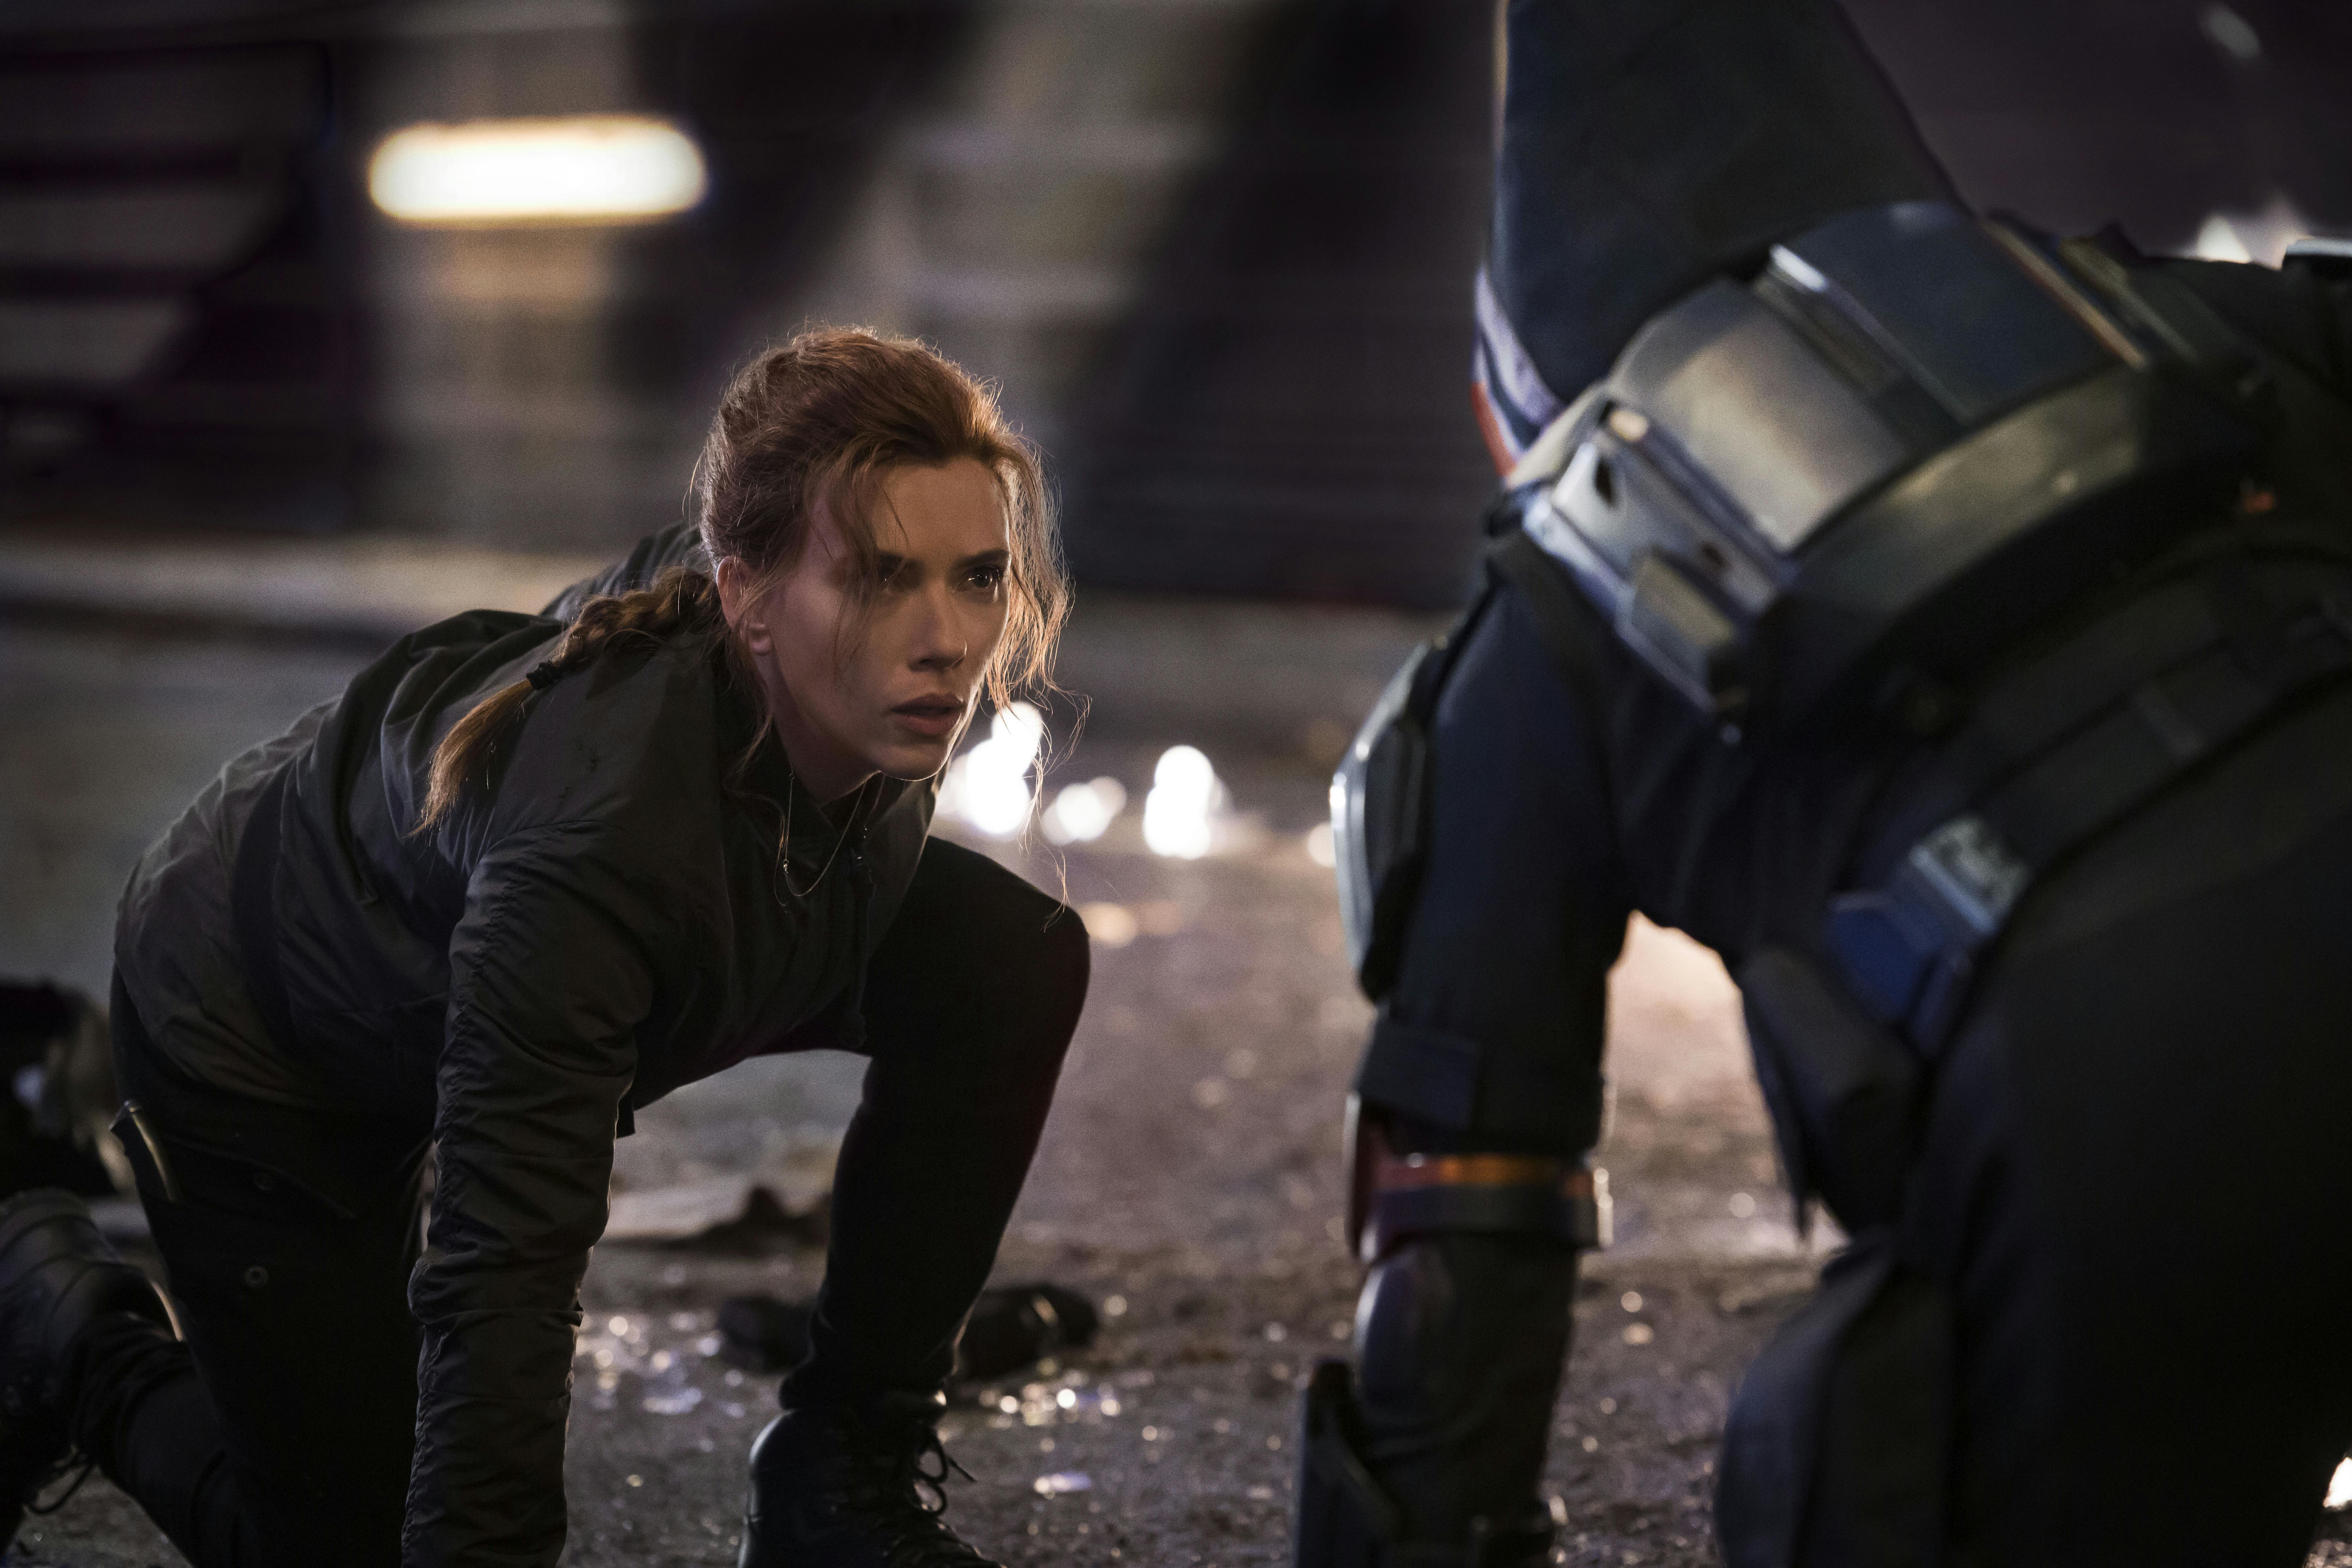 The First Trailer for Marvel Studios' 'Black Widow' Is Finally Here